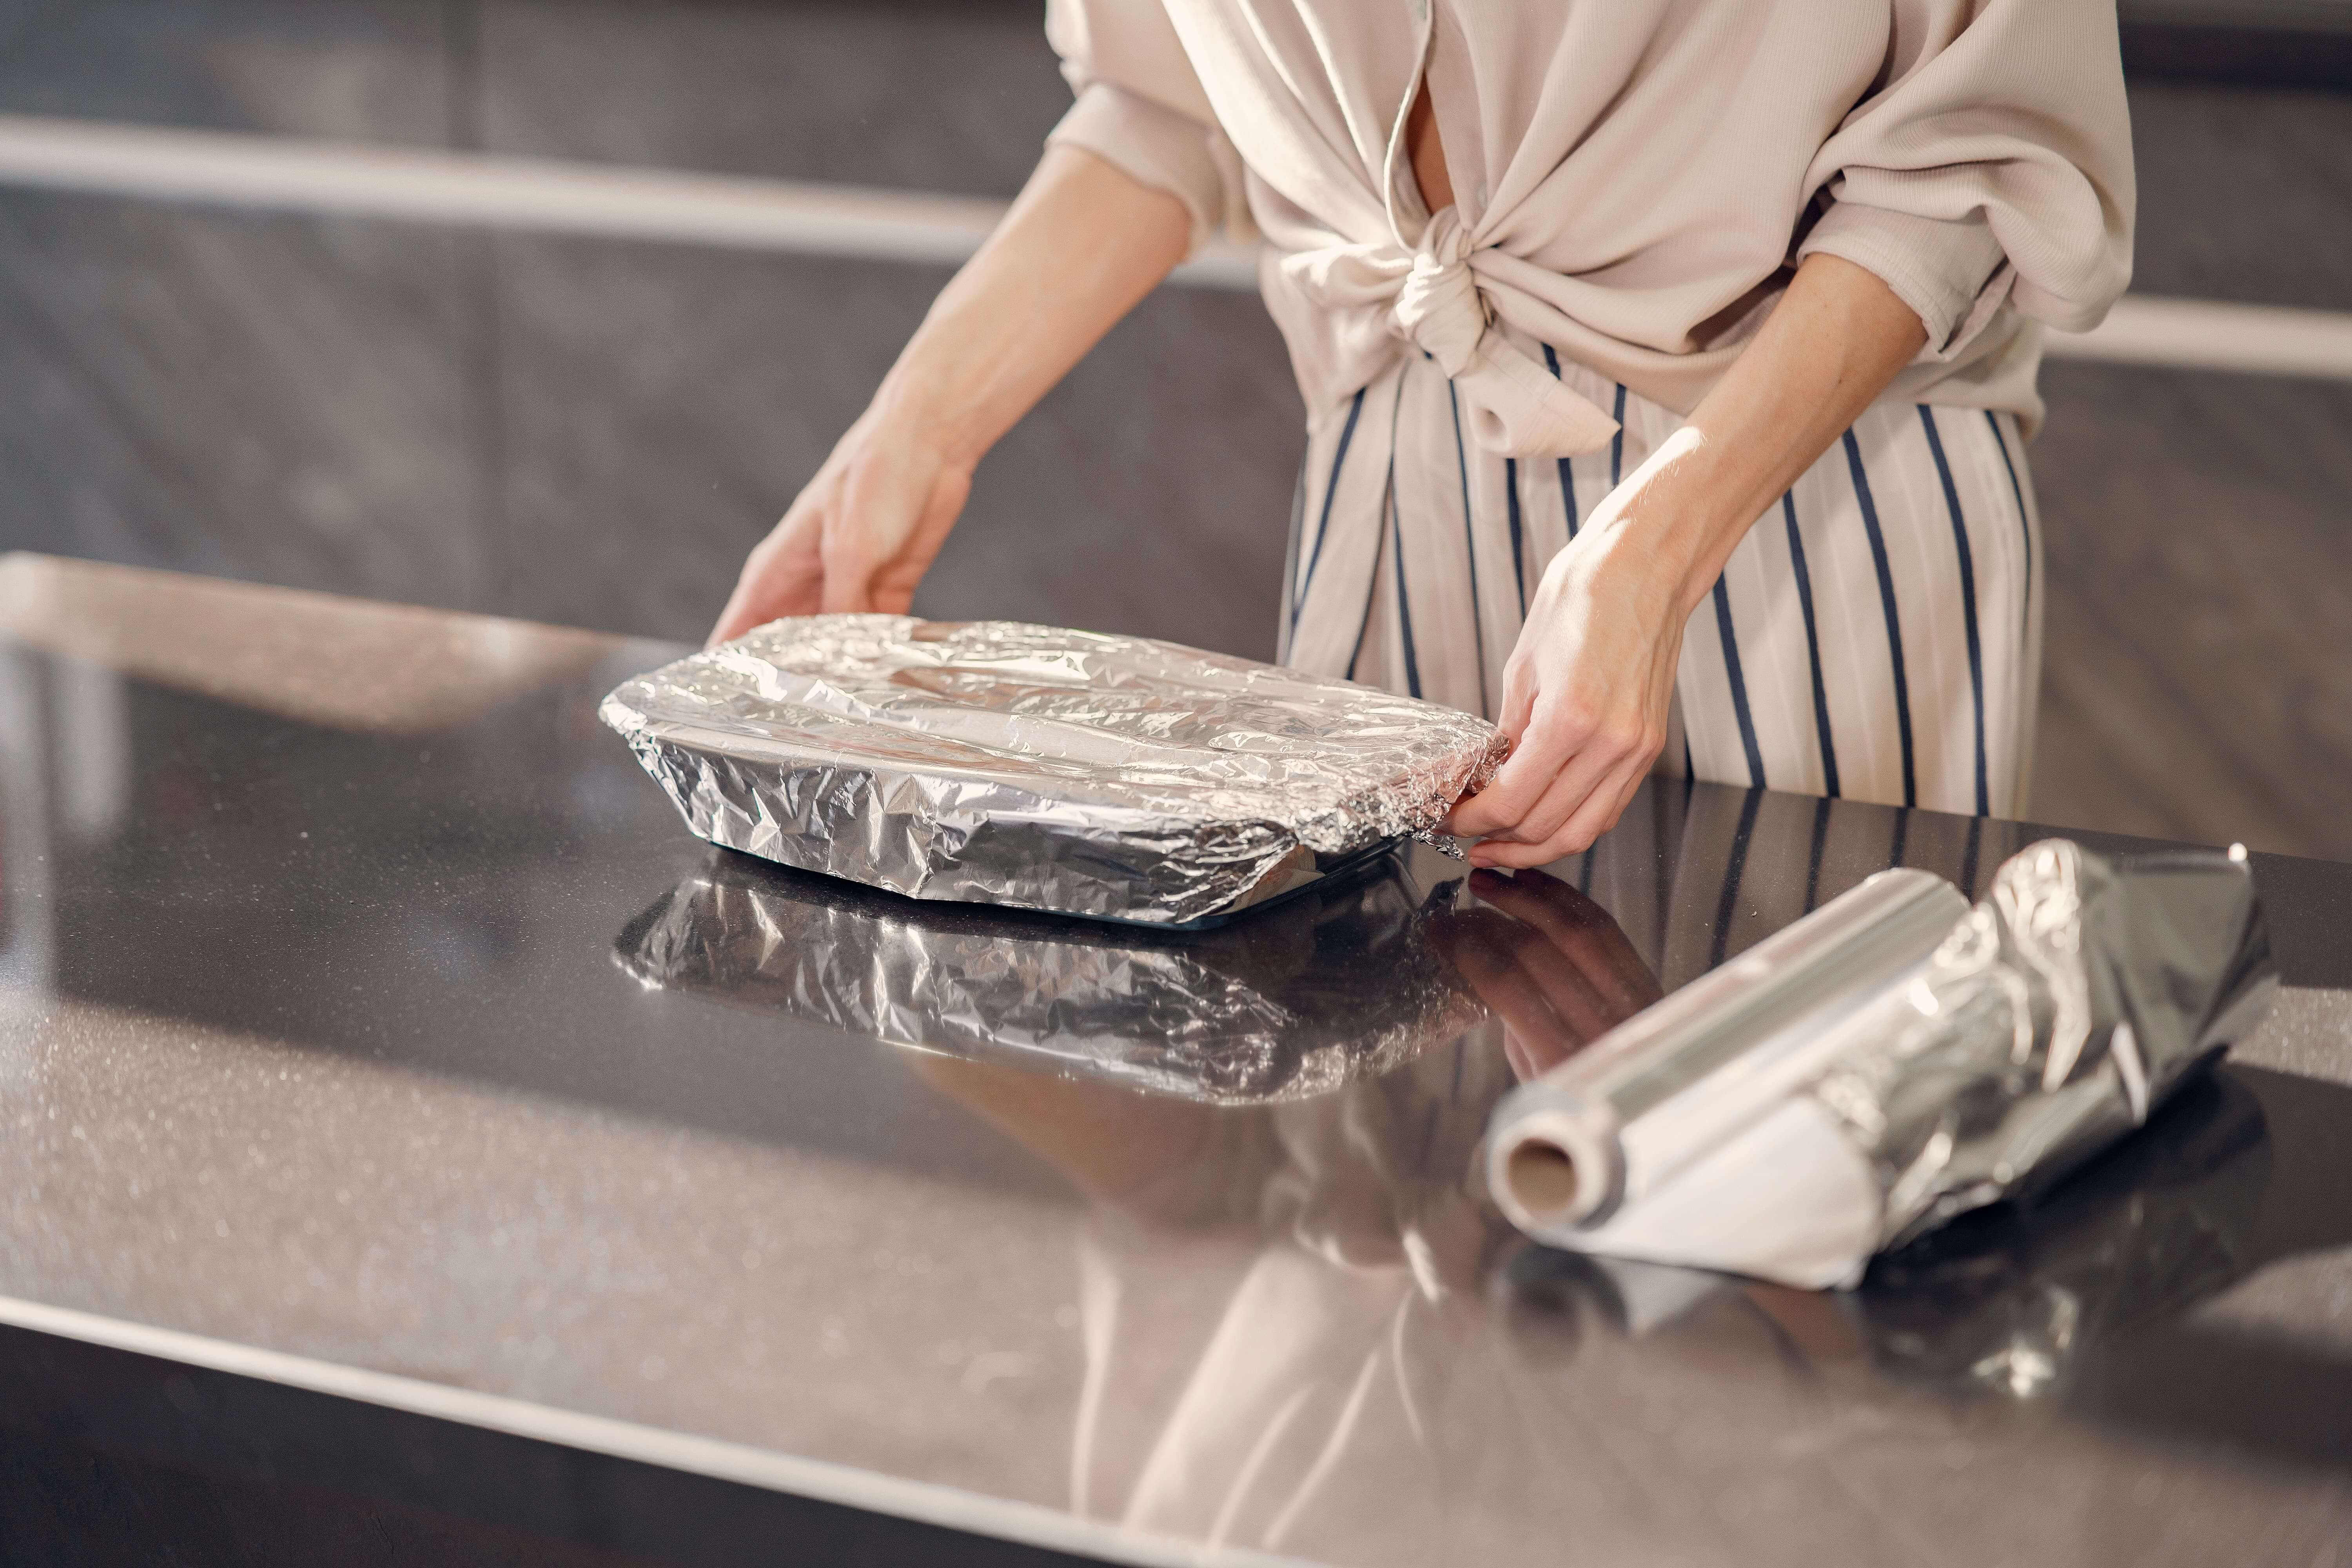 6 Mind-Blowing Hacks and Unconventional Uses of Aluminum Foil